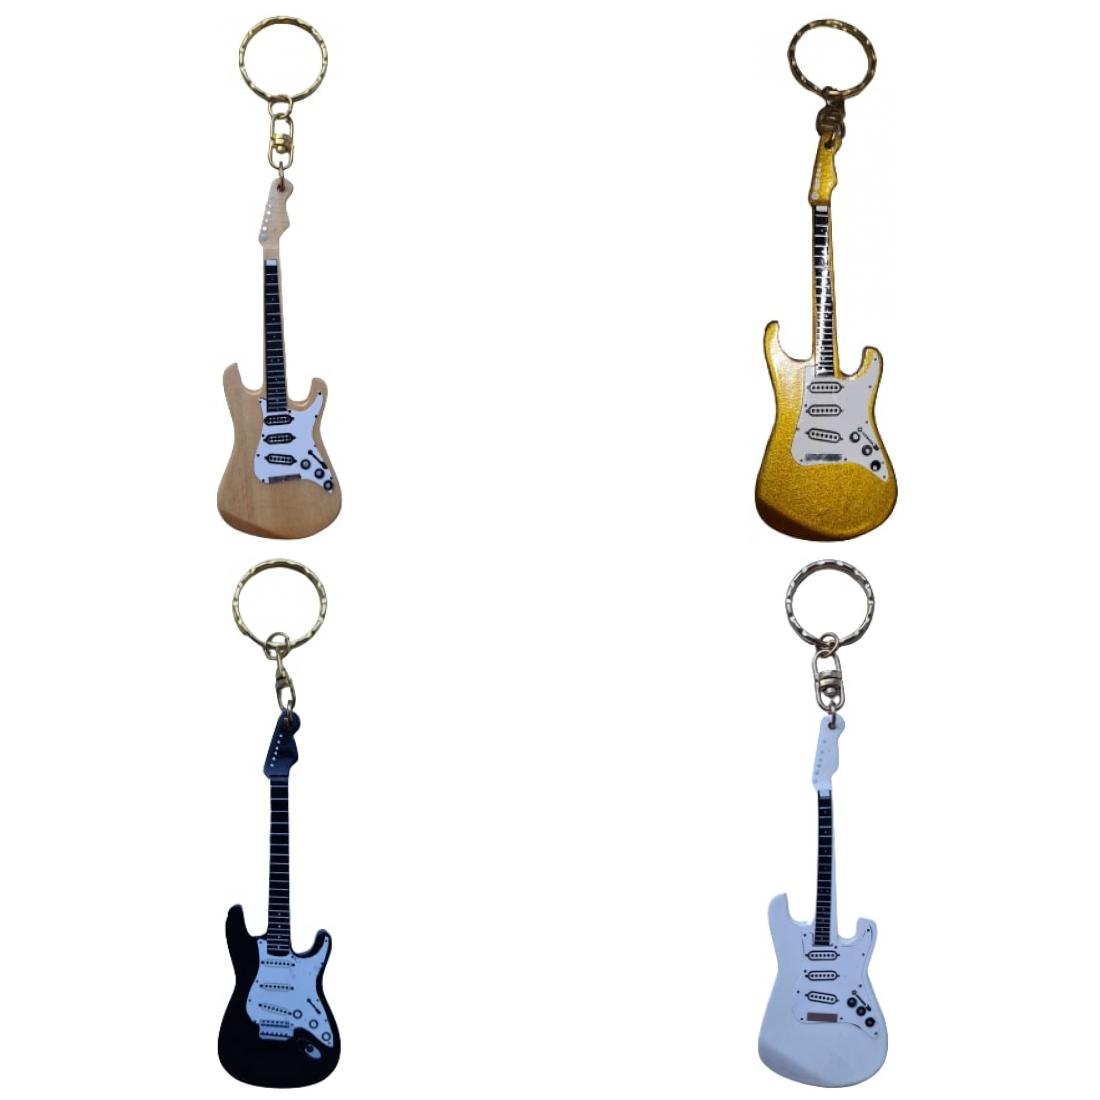 Fender-Keychain, electric guitar, assorted colors